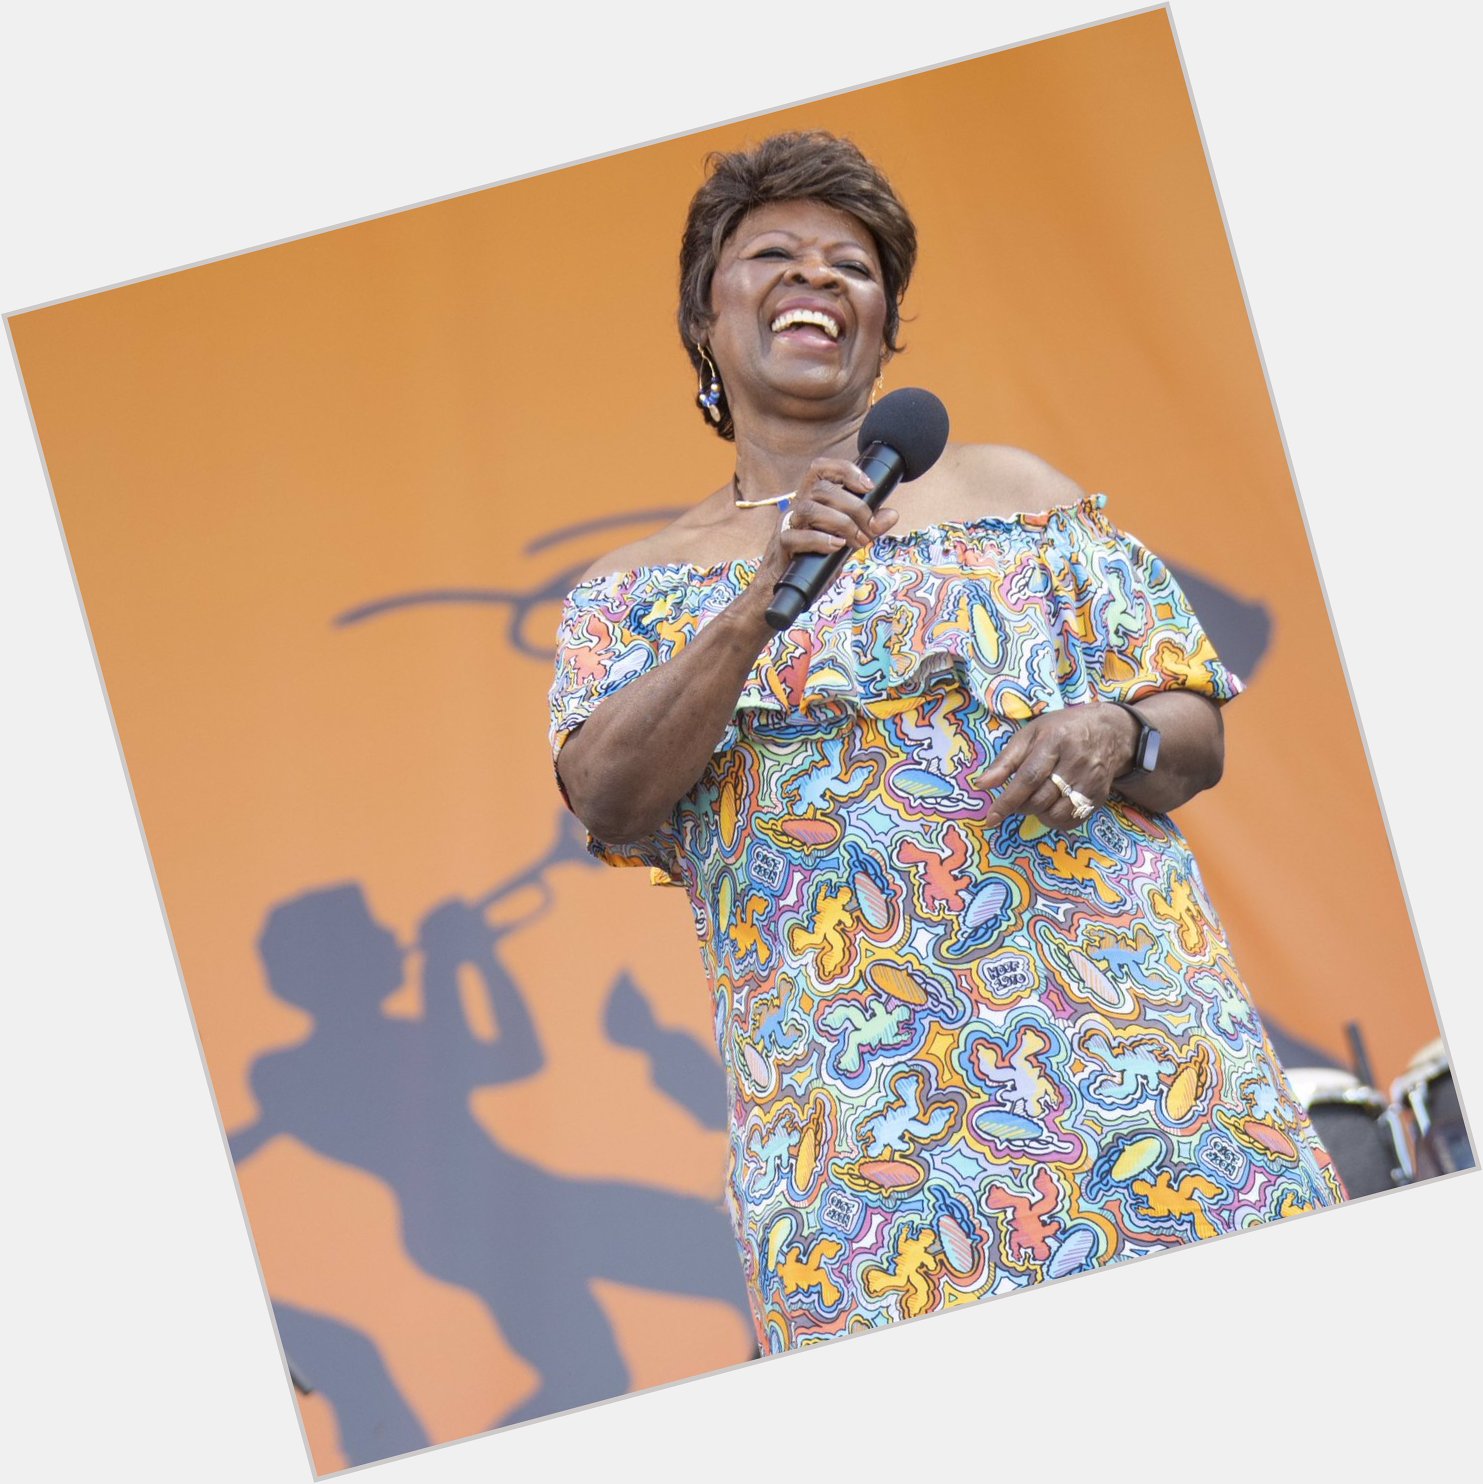 Please join us in wishing a very Happy Birthday to Irma Thomas, the Soul Queen of New Orleans! Douglas Mason 